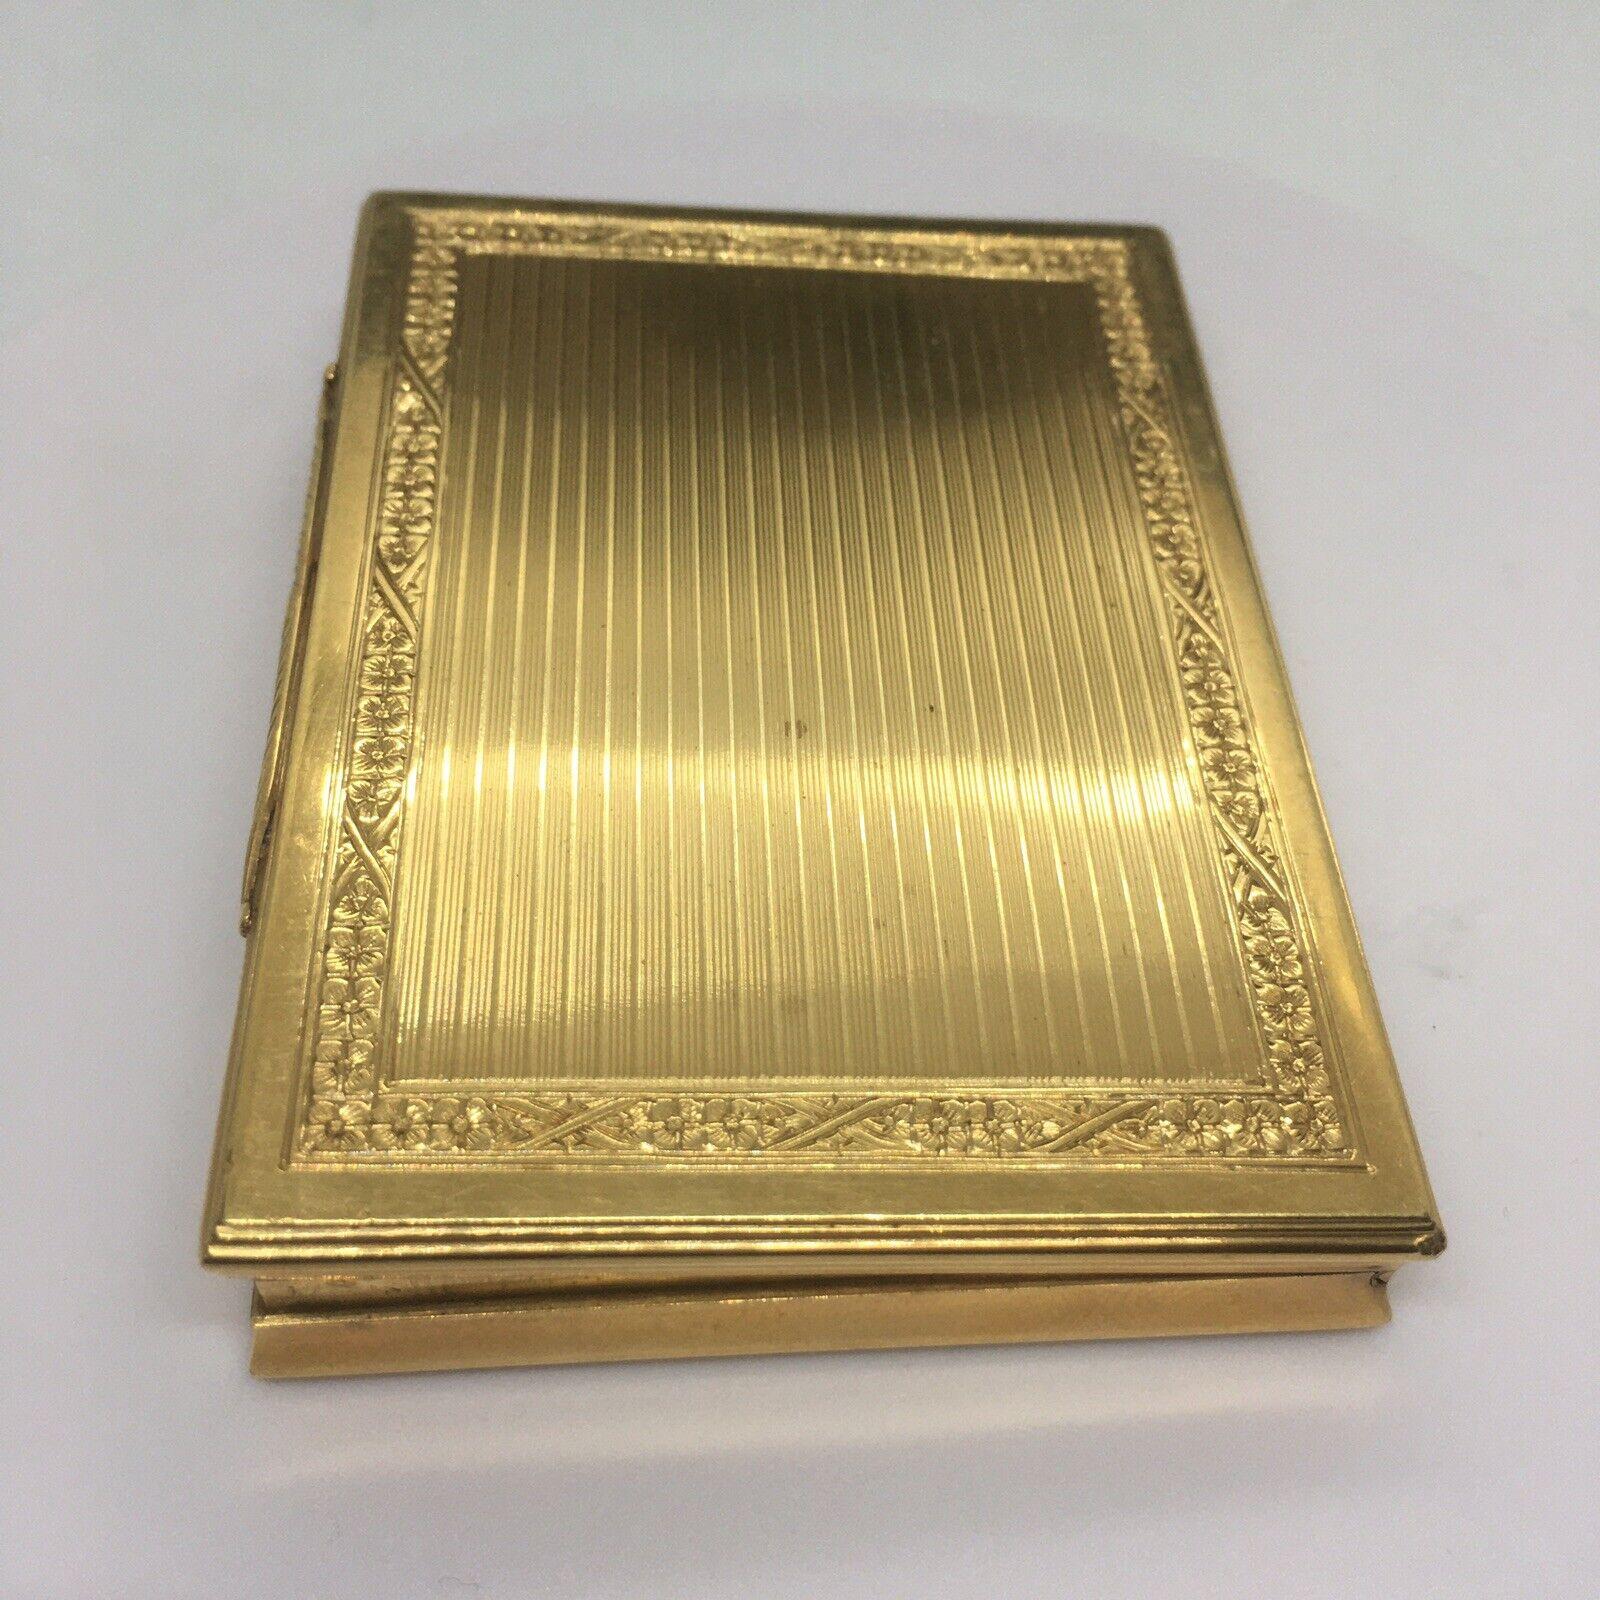 Art Nouveau American Made 18K Gold 1880s Engine Turned Engraved Case Snuff Box 97.5 Gram